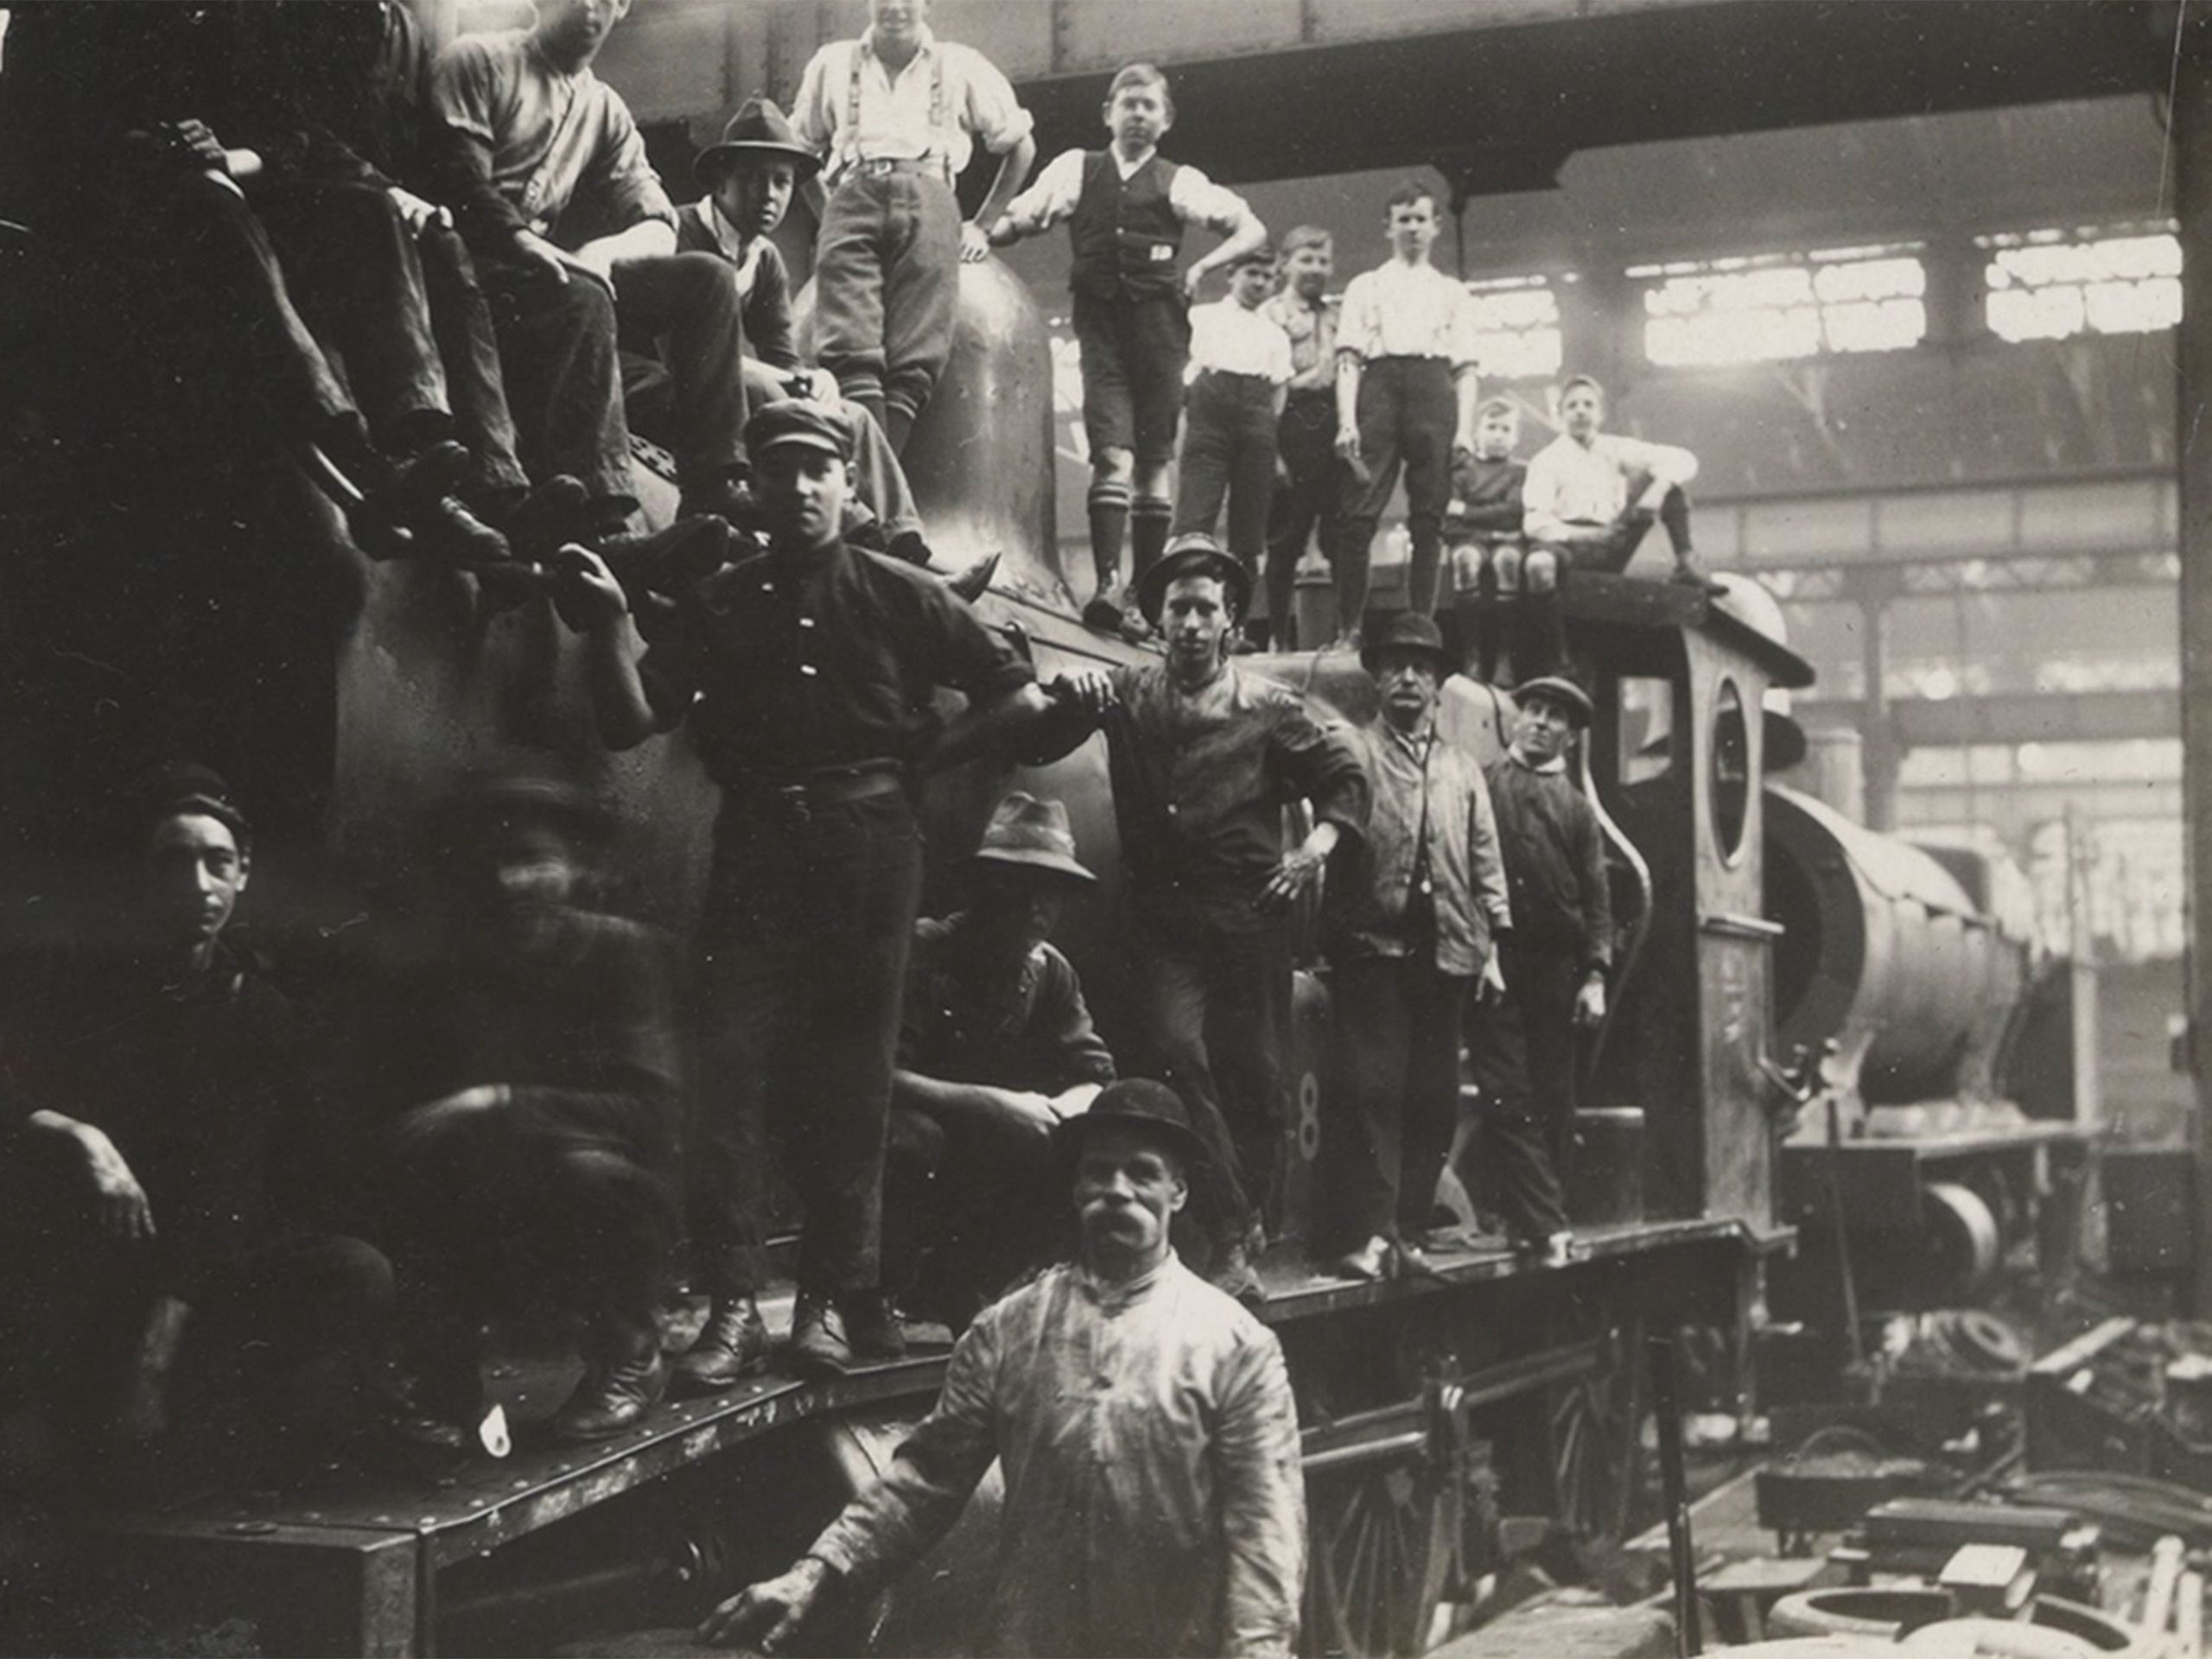 Young men and boys hang off a train posing for the photograph in a large workshop.